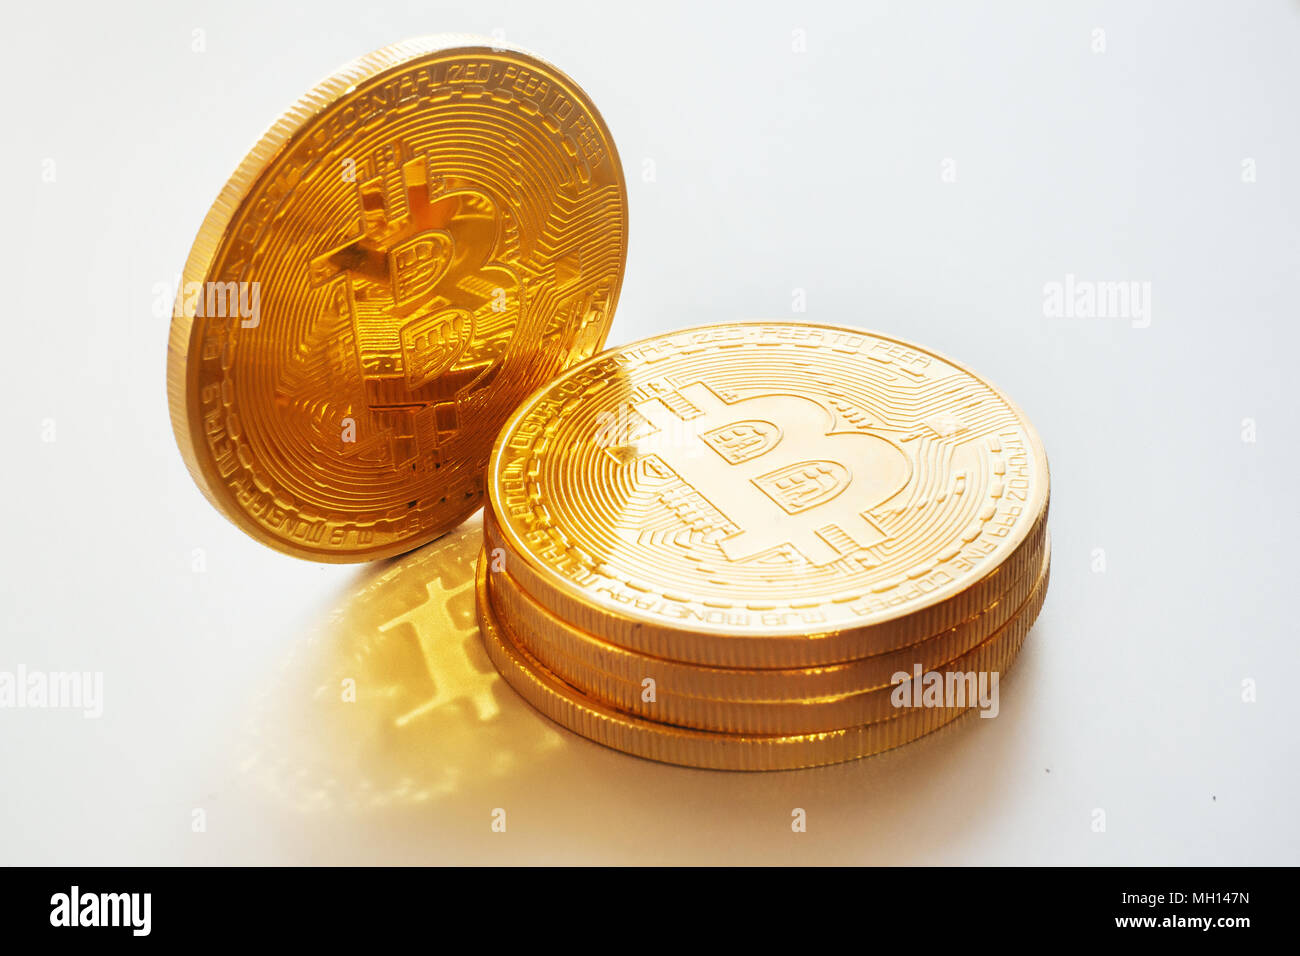 shiny golden bitcoins on white background, isolated. digital currency,  bit coin, cryptocurrency concept.space for text, digital money with reflection Stock Photo